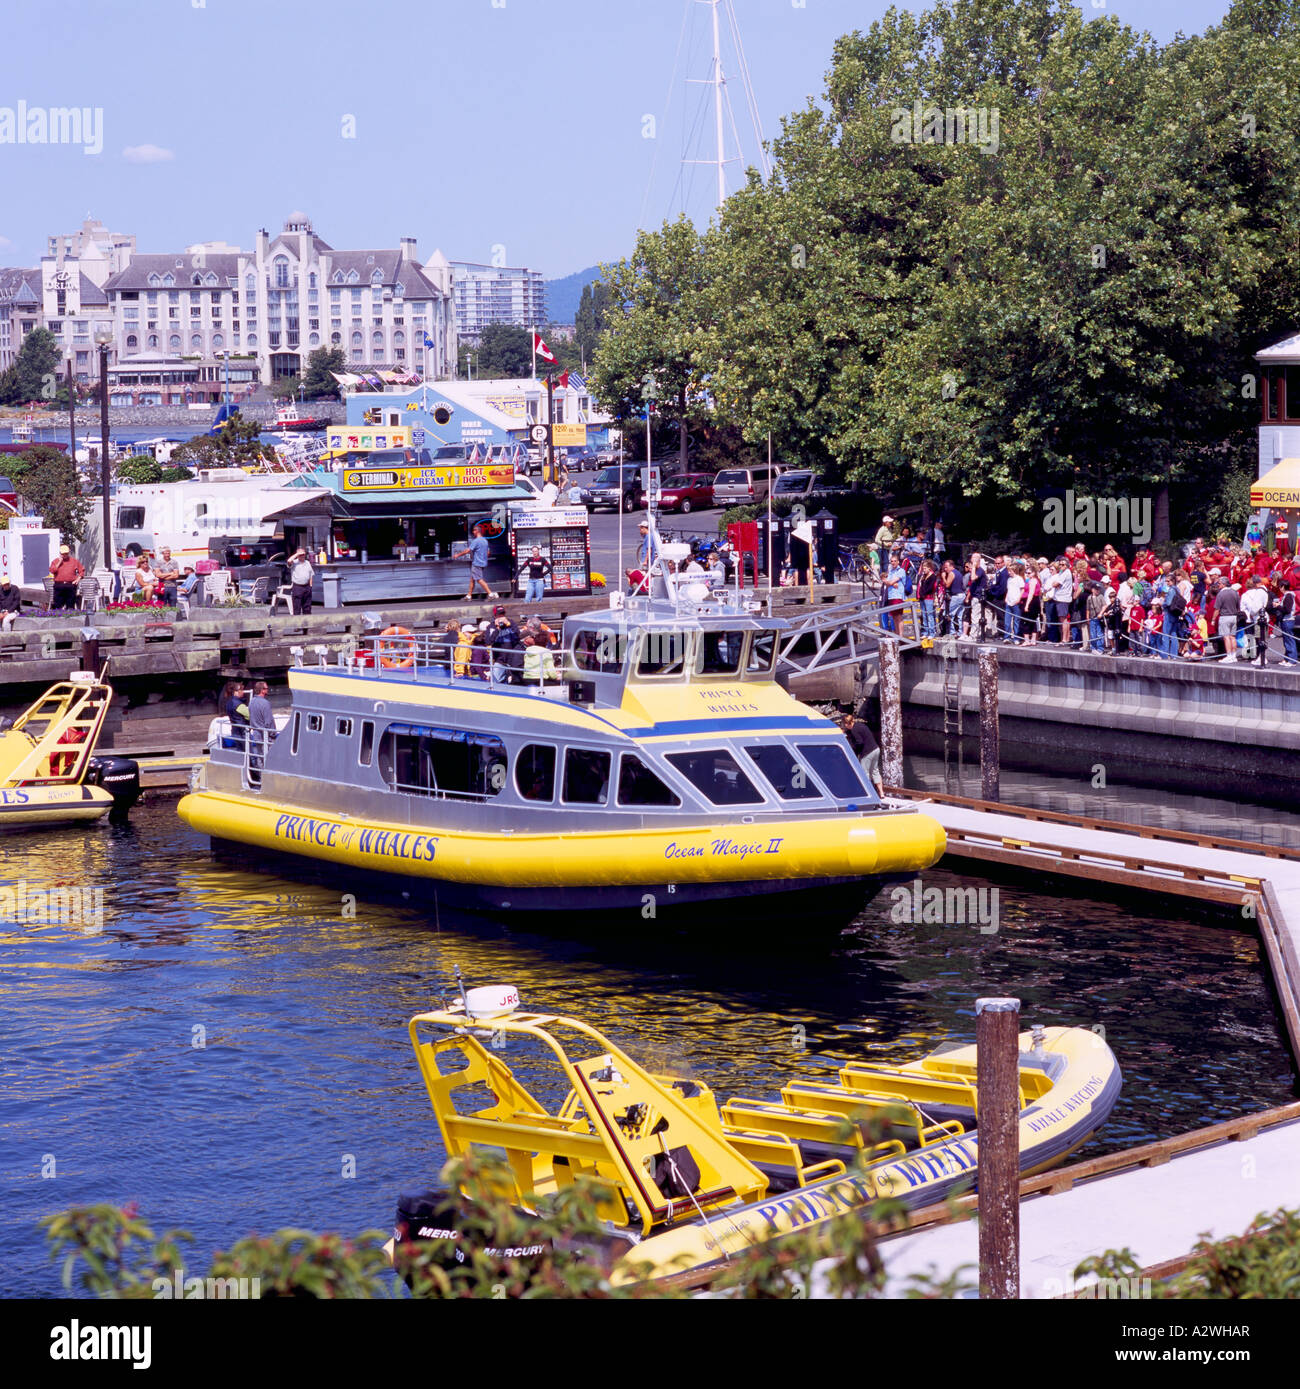 Tourists waiting to board Whale Watching Boat docked in Inner Harbour, Victoria, BC, Vancouver Island, British Columbia, Canada Stock Photo